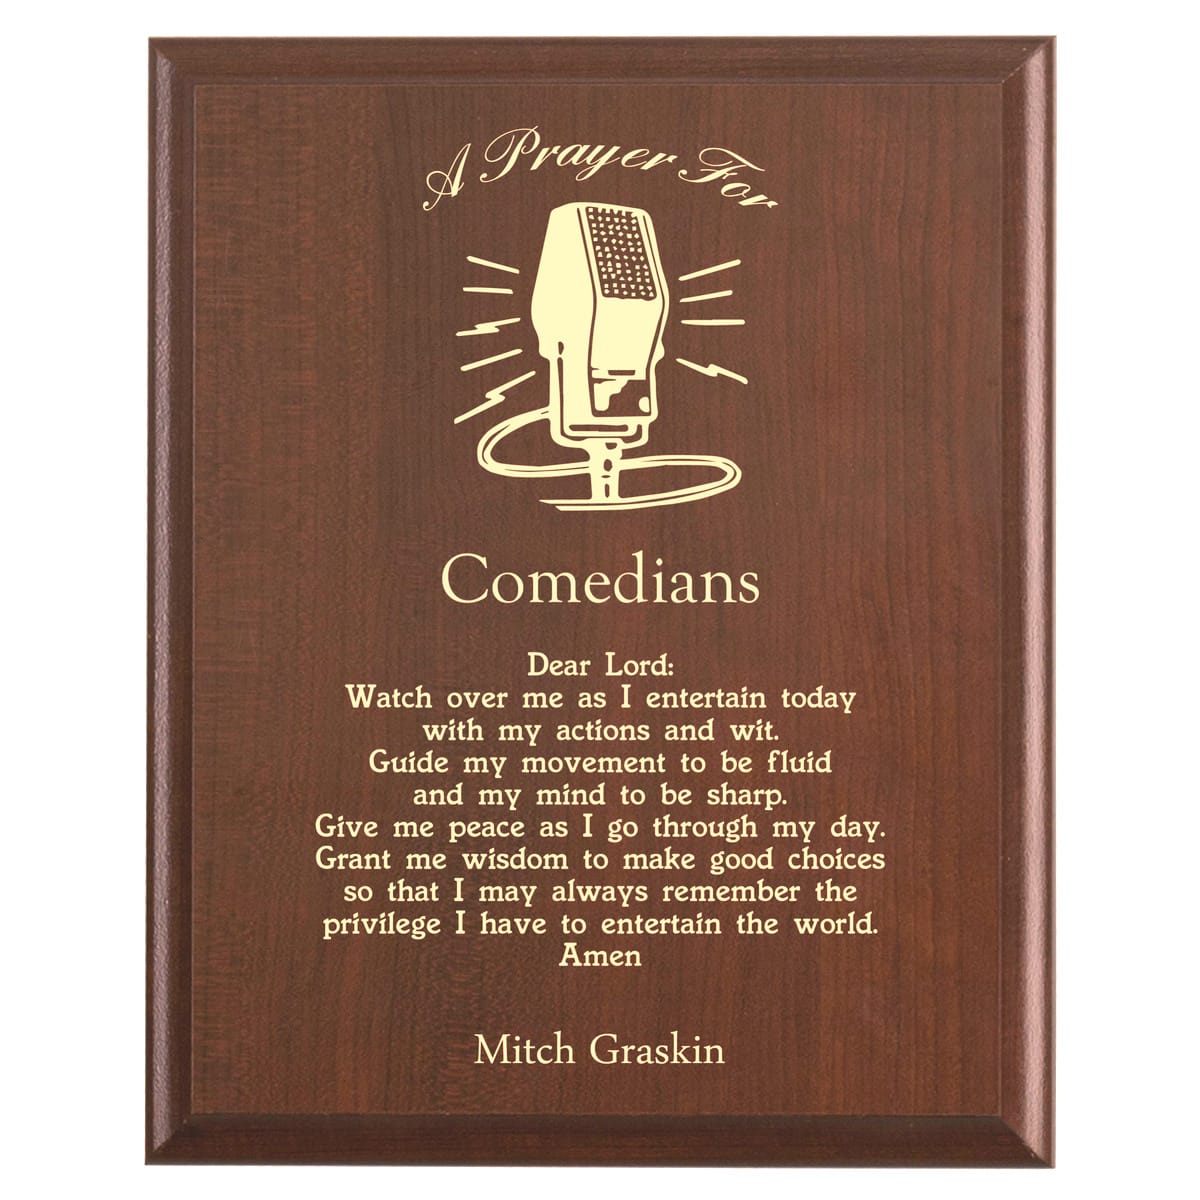 Plaque photo: Stand-up Comedy Prayer Plaque design with free personalization. Wood style finish with customized text.